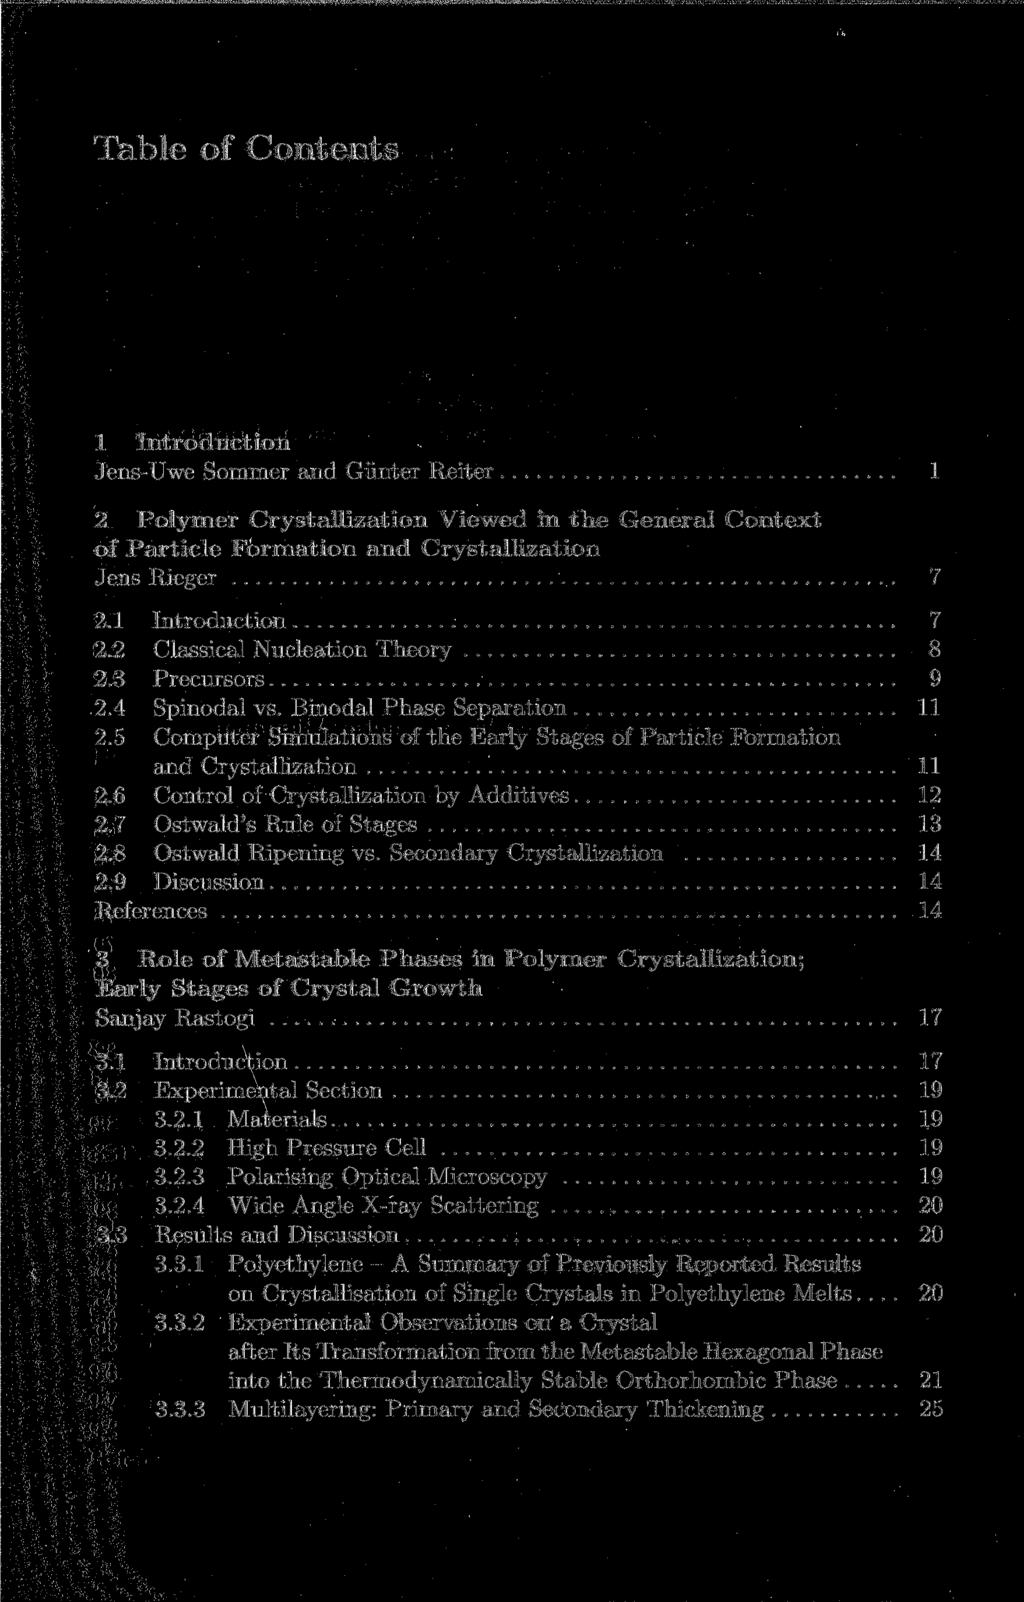 Table of Contents 1 Introduction Jens-Uwe Sommer and Günter Reiter 1 2 Polymer Crystallization Viewed in the General Context of Particle Formation and Crystallization Jens Rieger 7 2.